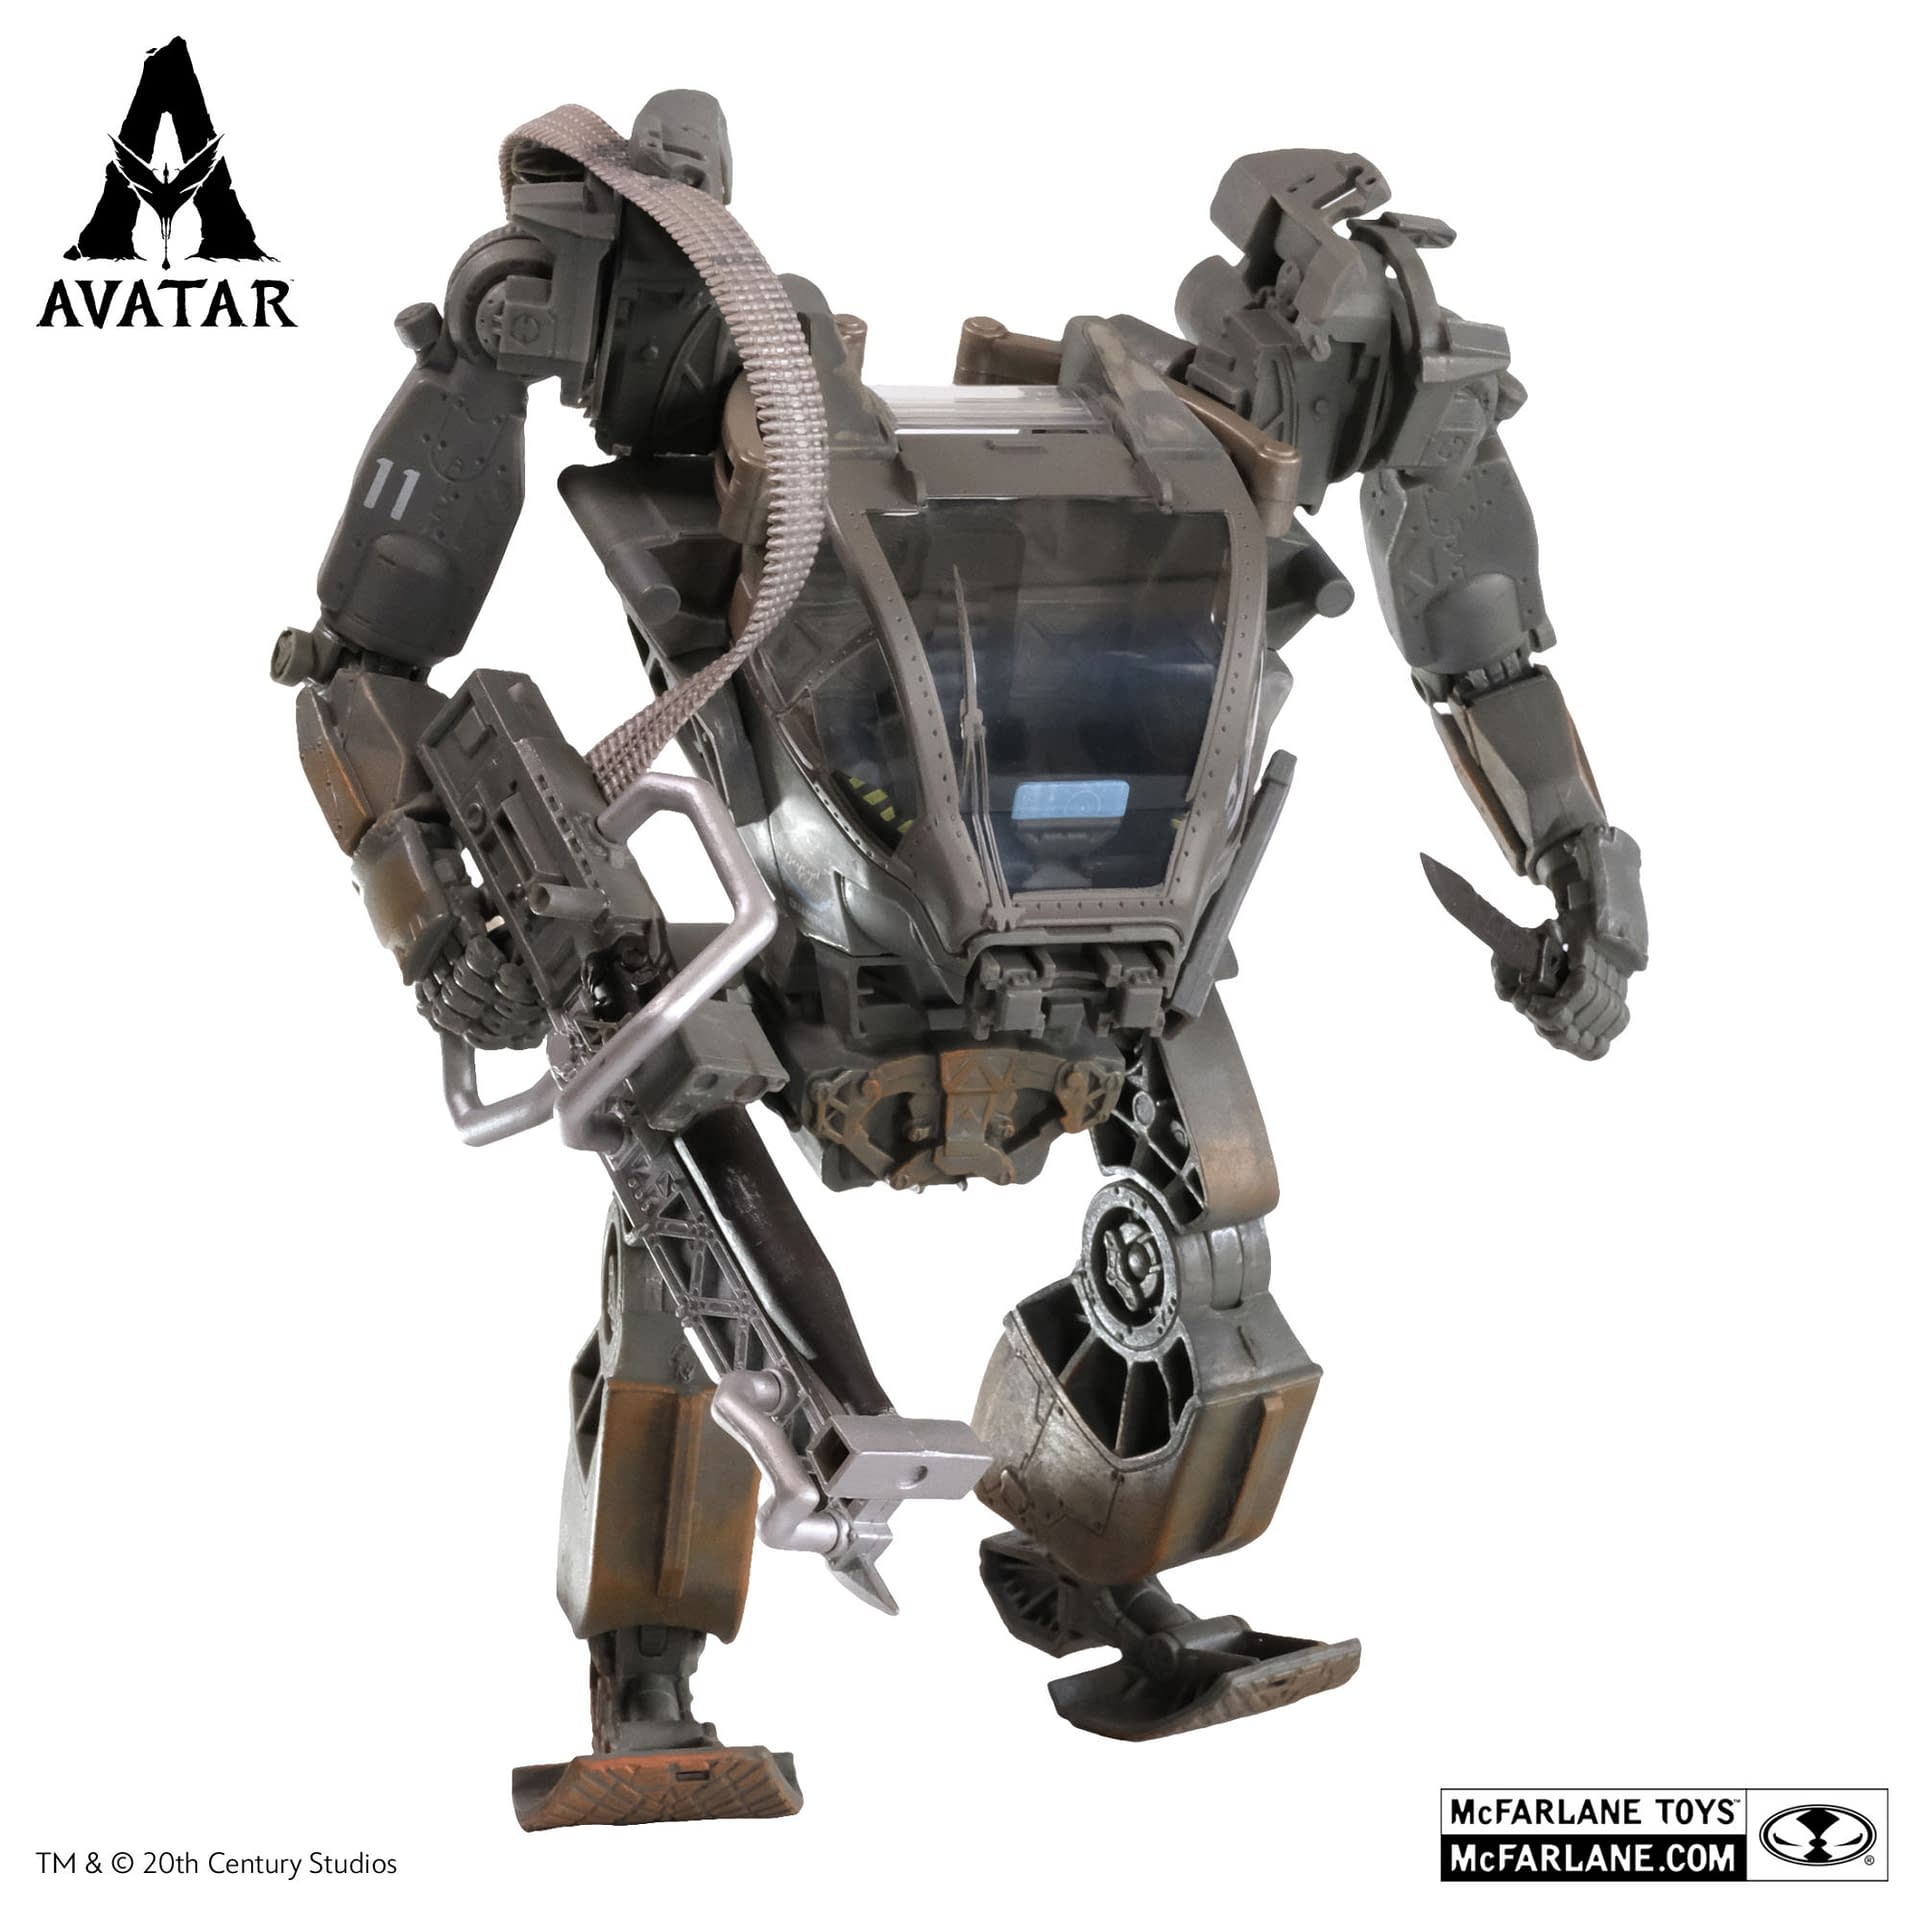 Avatar's Colonel Quaritch and His AMP Suit Arrive at McFarlane Toys